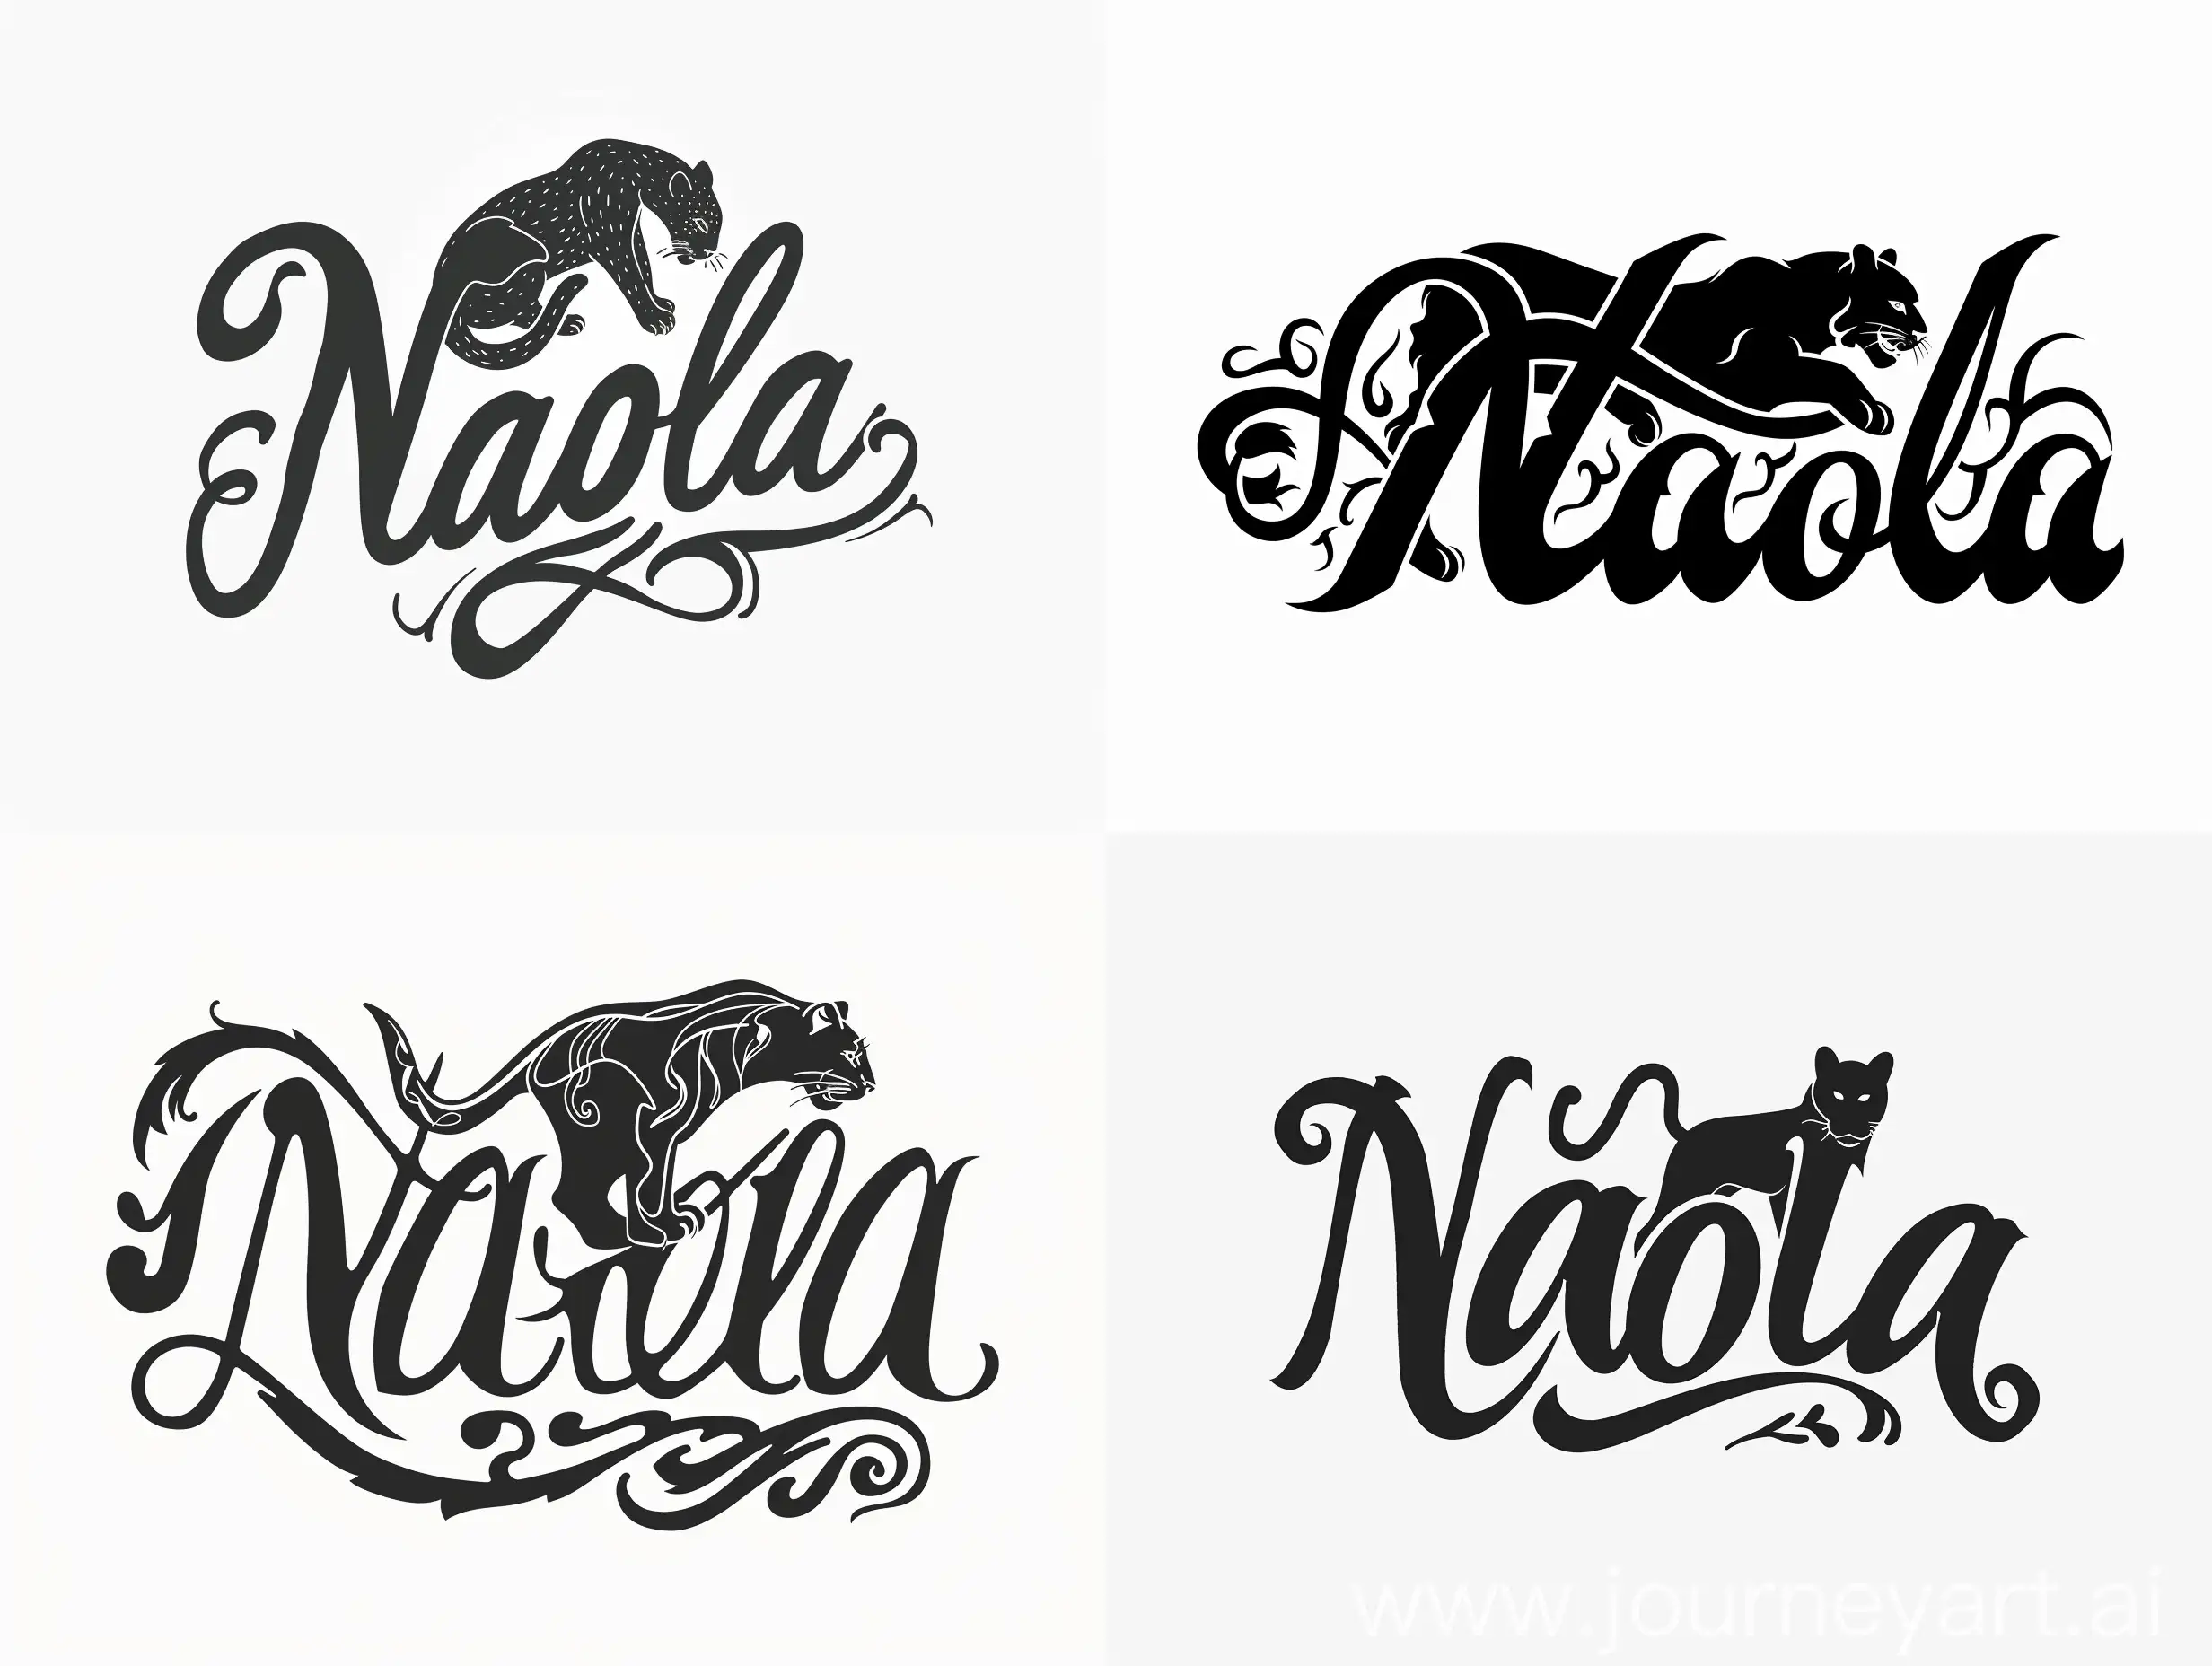 Minimalistic-Calligraphic-Lettering-Logo-with-Panther-Silhouette-Naola